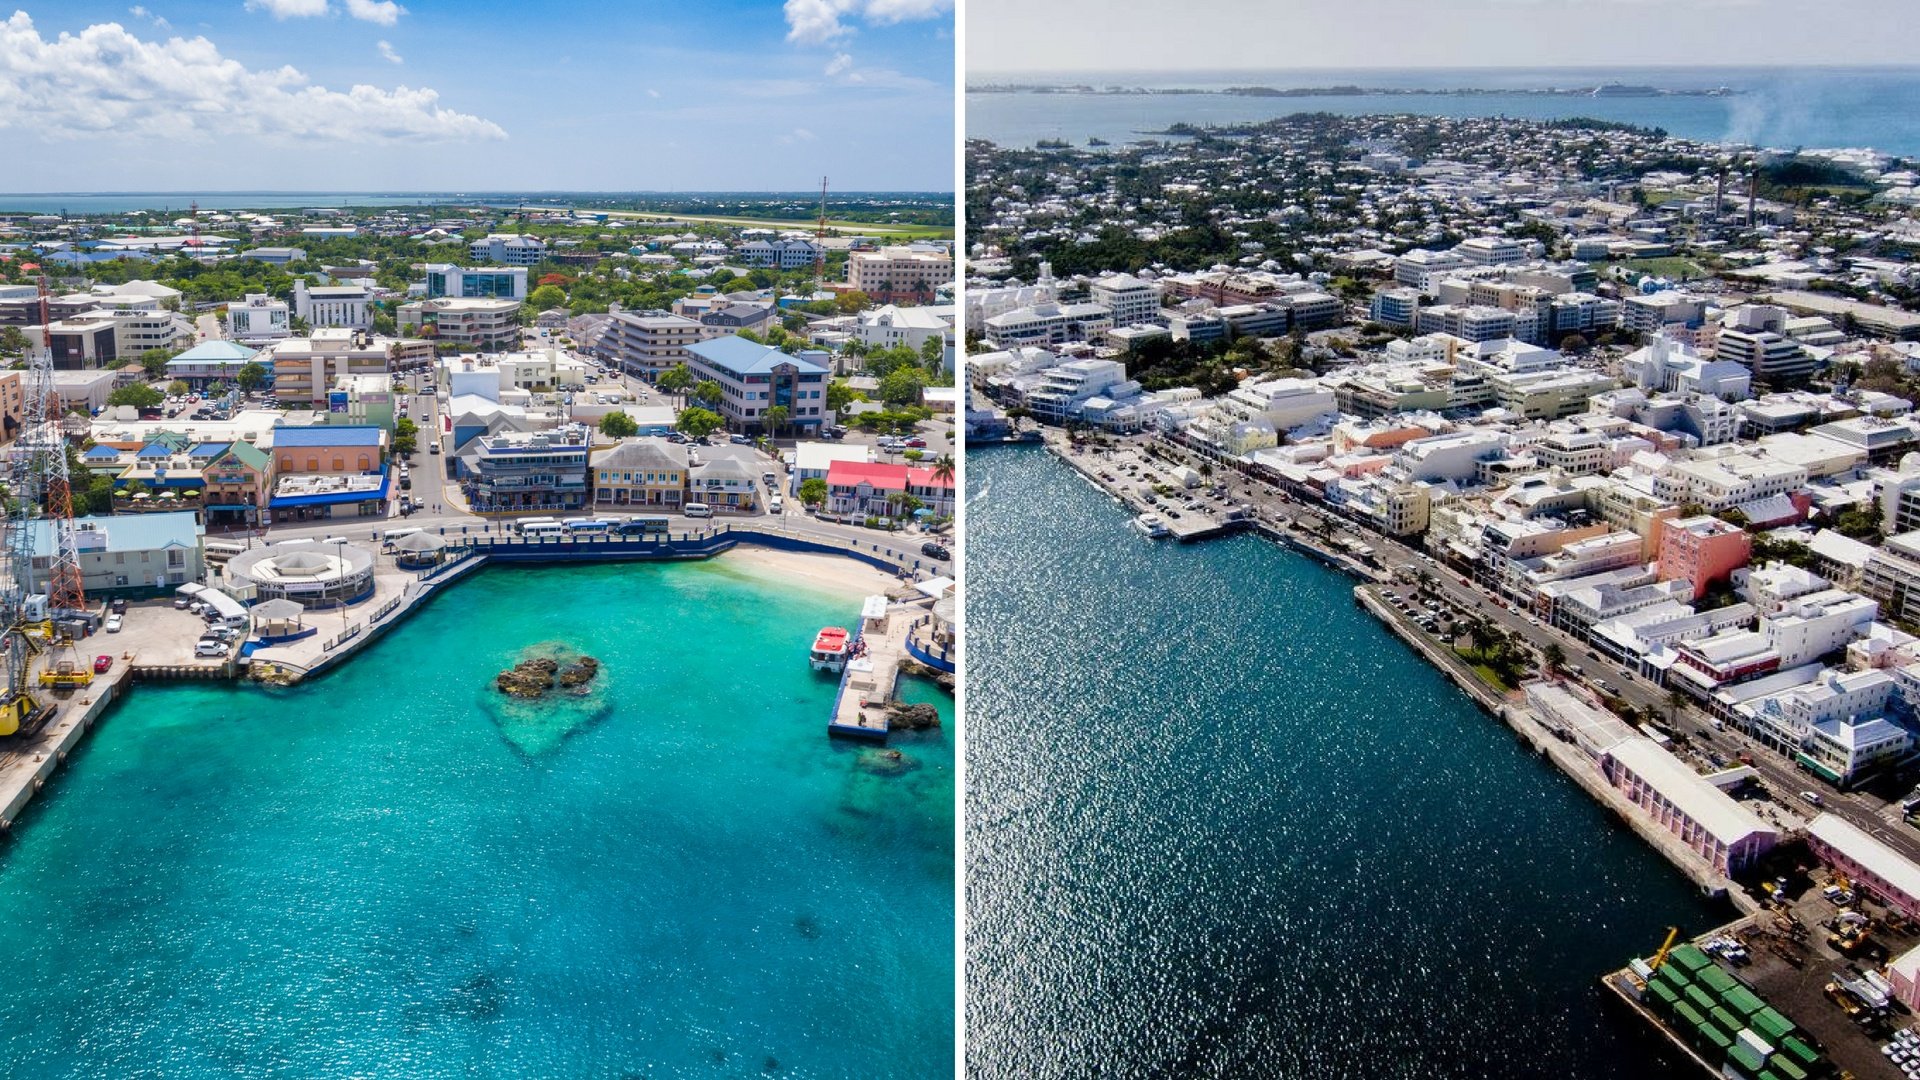 What makes Cayman different from Bermuda?